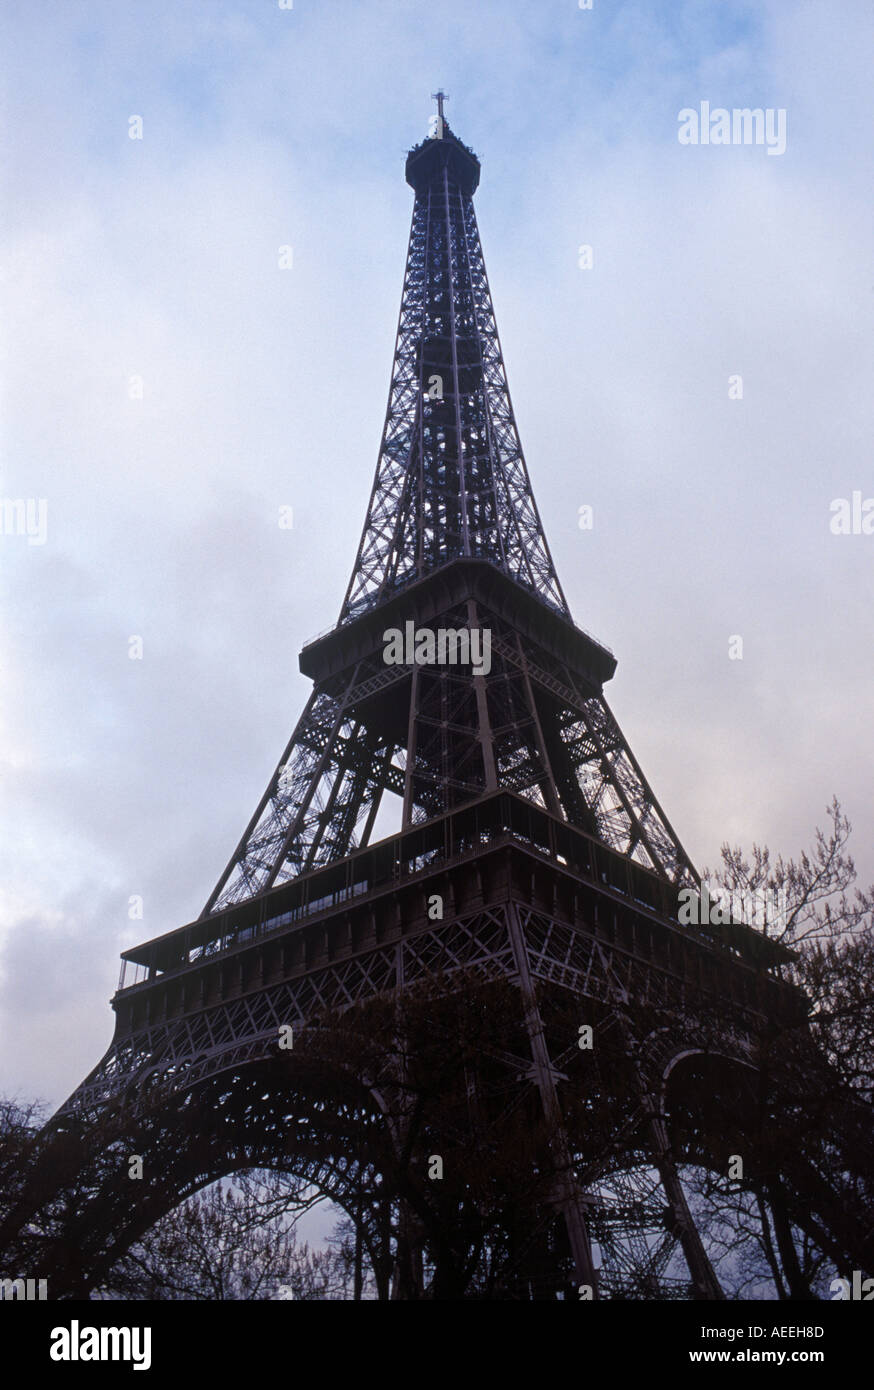 The Eiffel Tower in Paris France Stock Photo